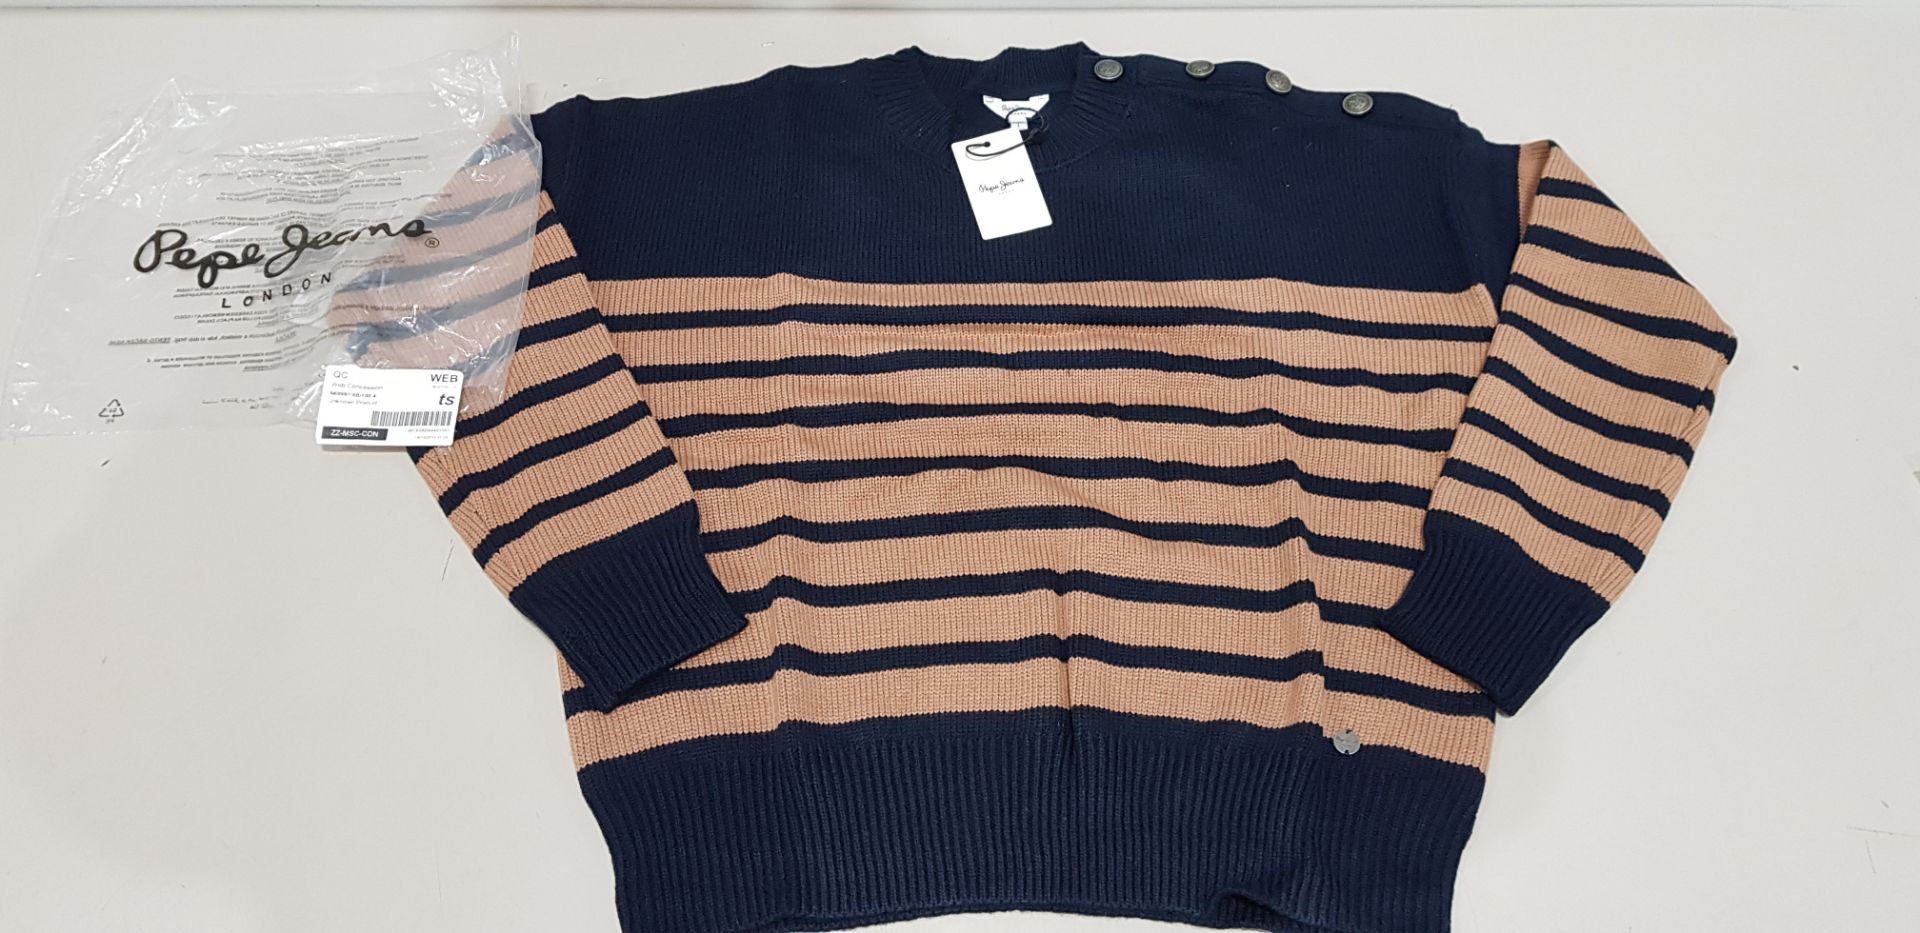 17 X BRAND NEW PEPE JEANS BRETONA JUMPERS IN VARIOUS SIZES TO INCLUDE S - XL